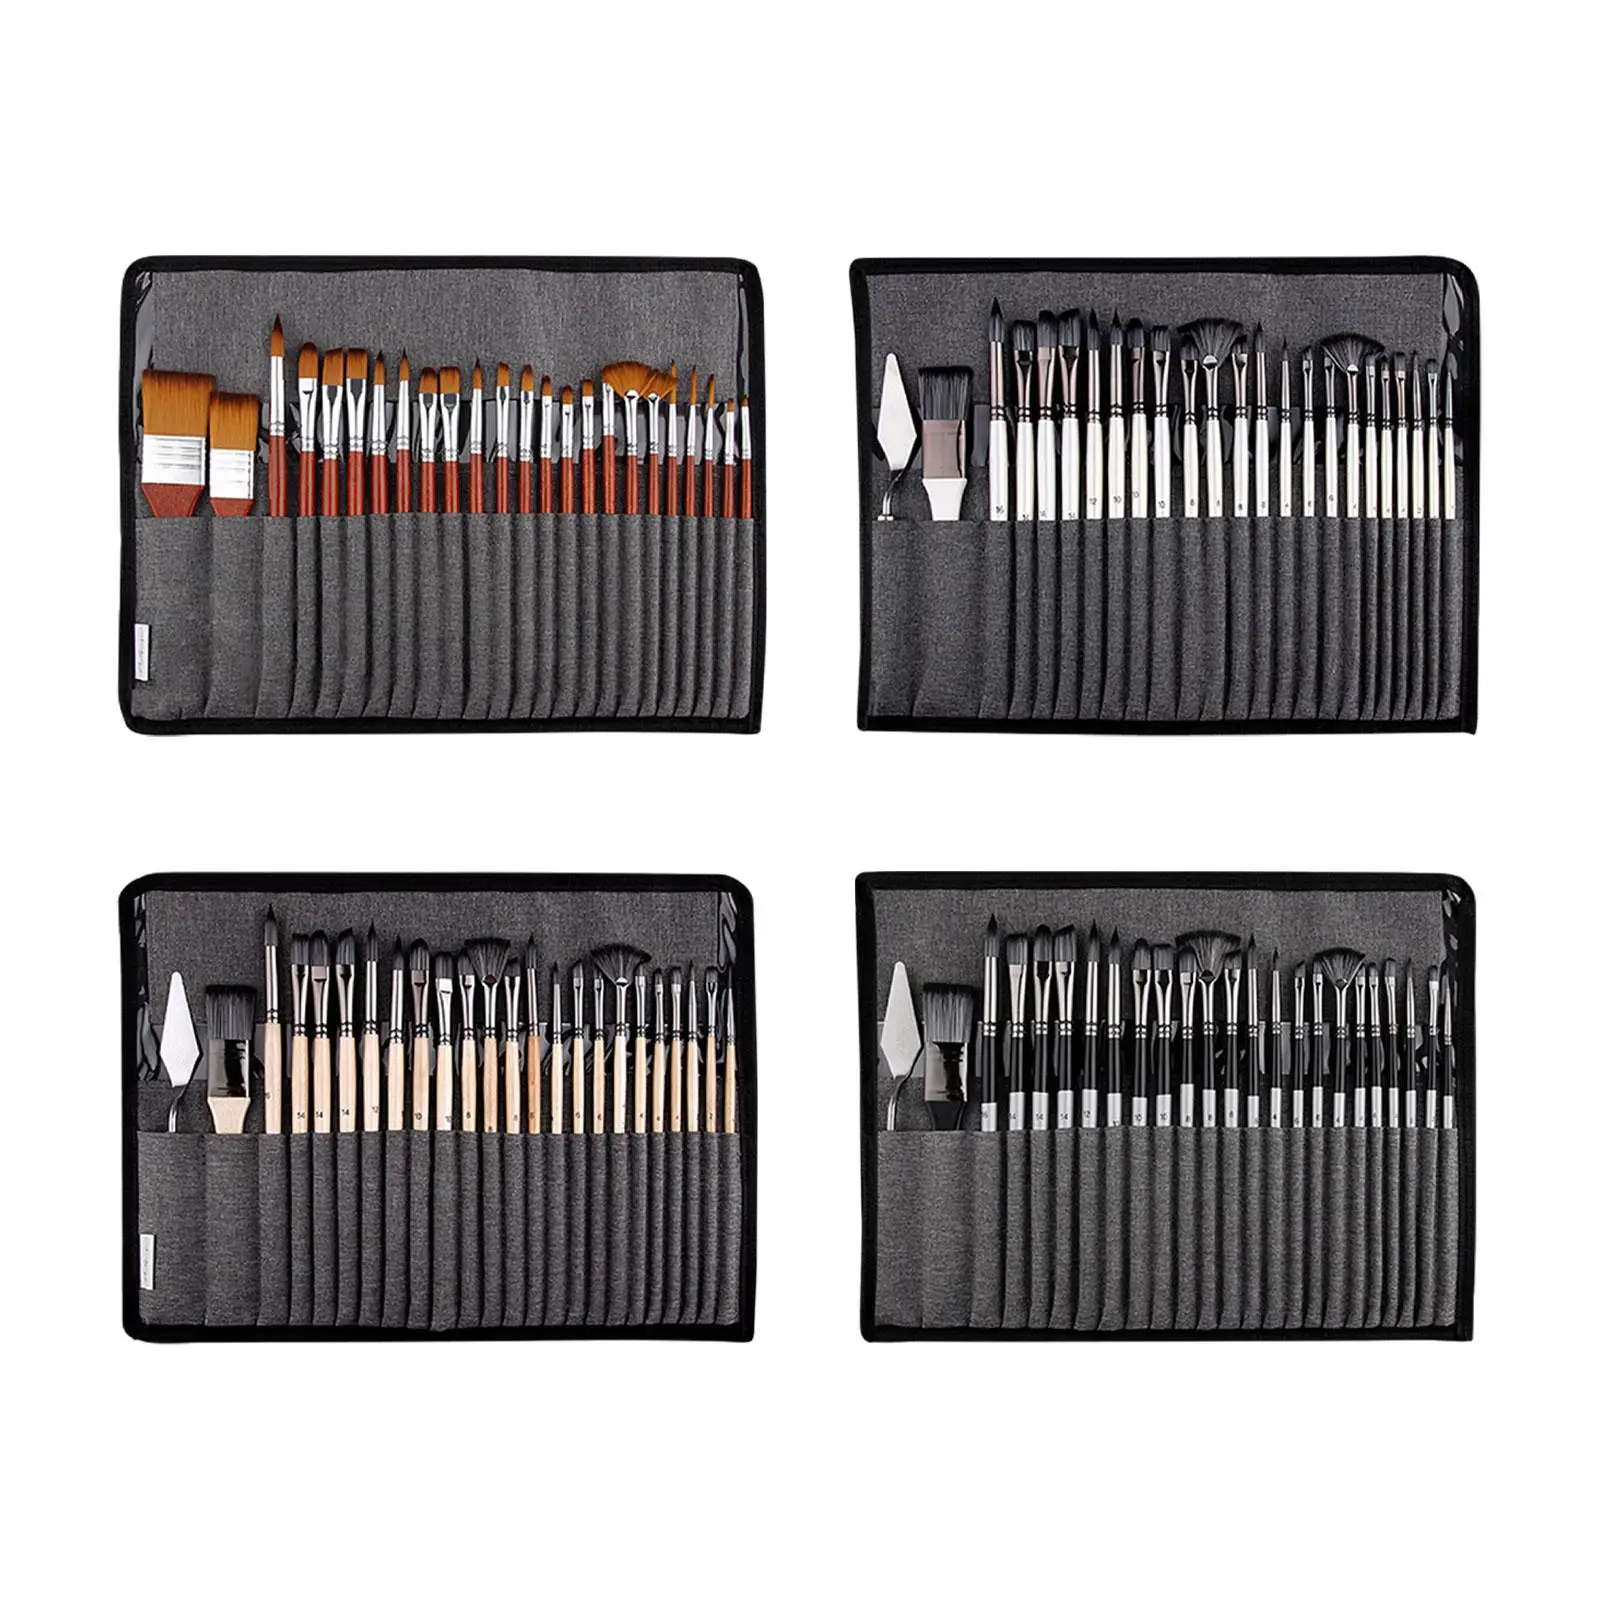 25x Painting Brushes Easy Cleaning Gouache Comfortable Gripping Watercolor Paint Brush Set with Storage Bag Paintbrushes